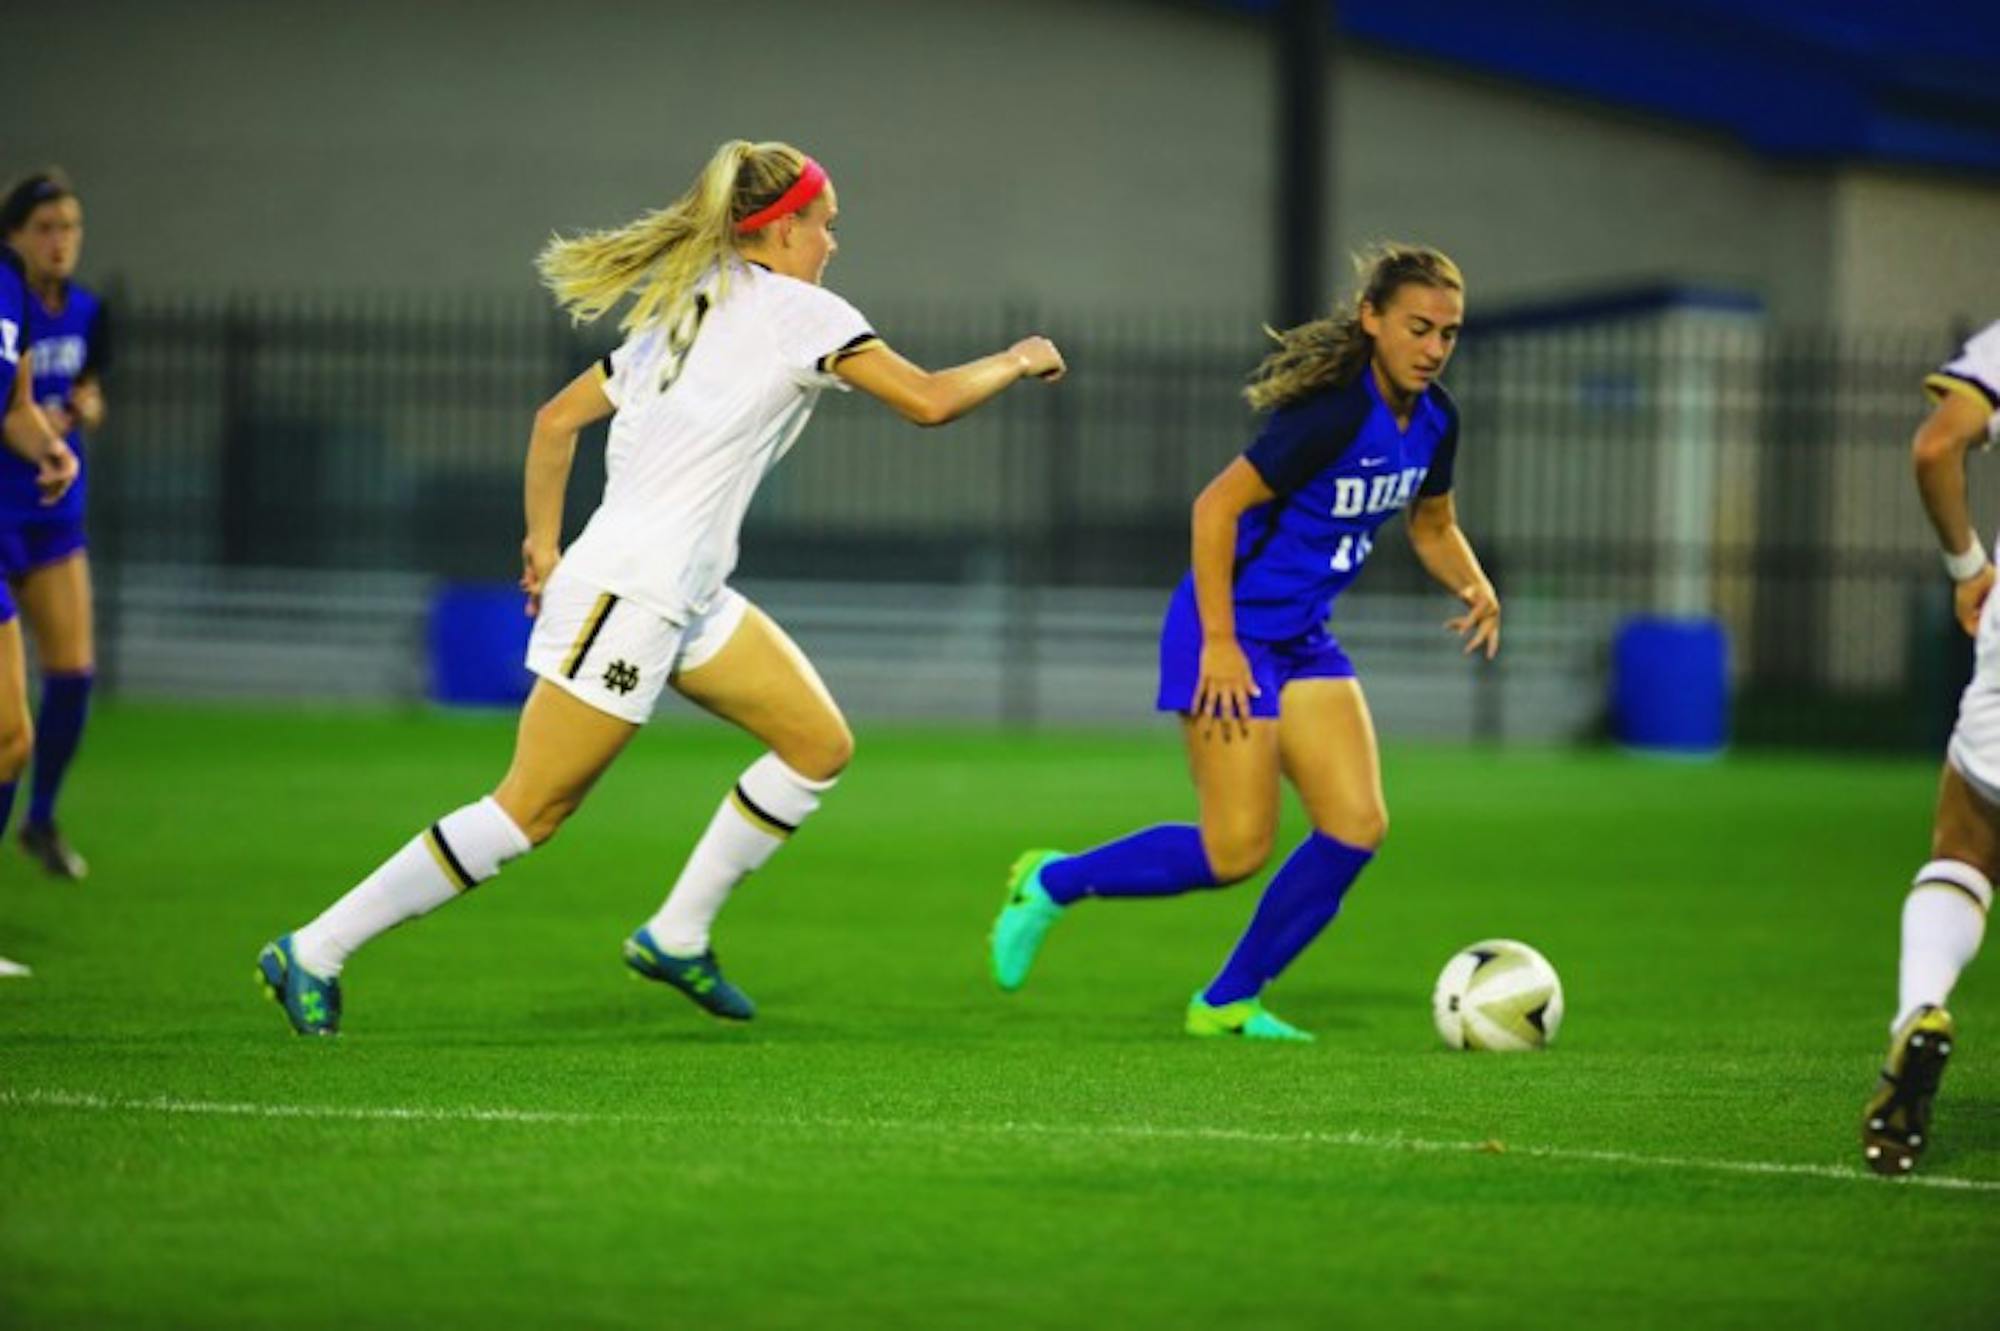 Irish sophomore forward Natalie Jacobs chases down an opponent during Notre Dame’s 3-0 loss to Duke on Sept. 21 at Alumni Stadium. Jacobs is currently Notre Dame’s leading scorer with 19 points on the year.